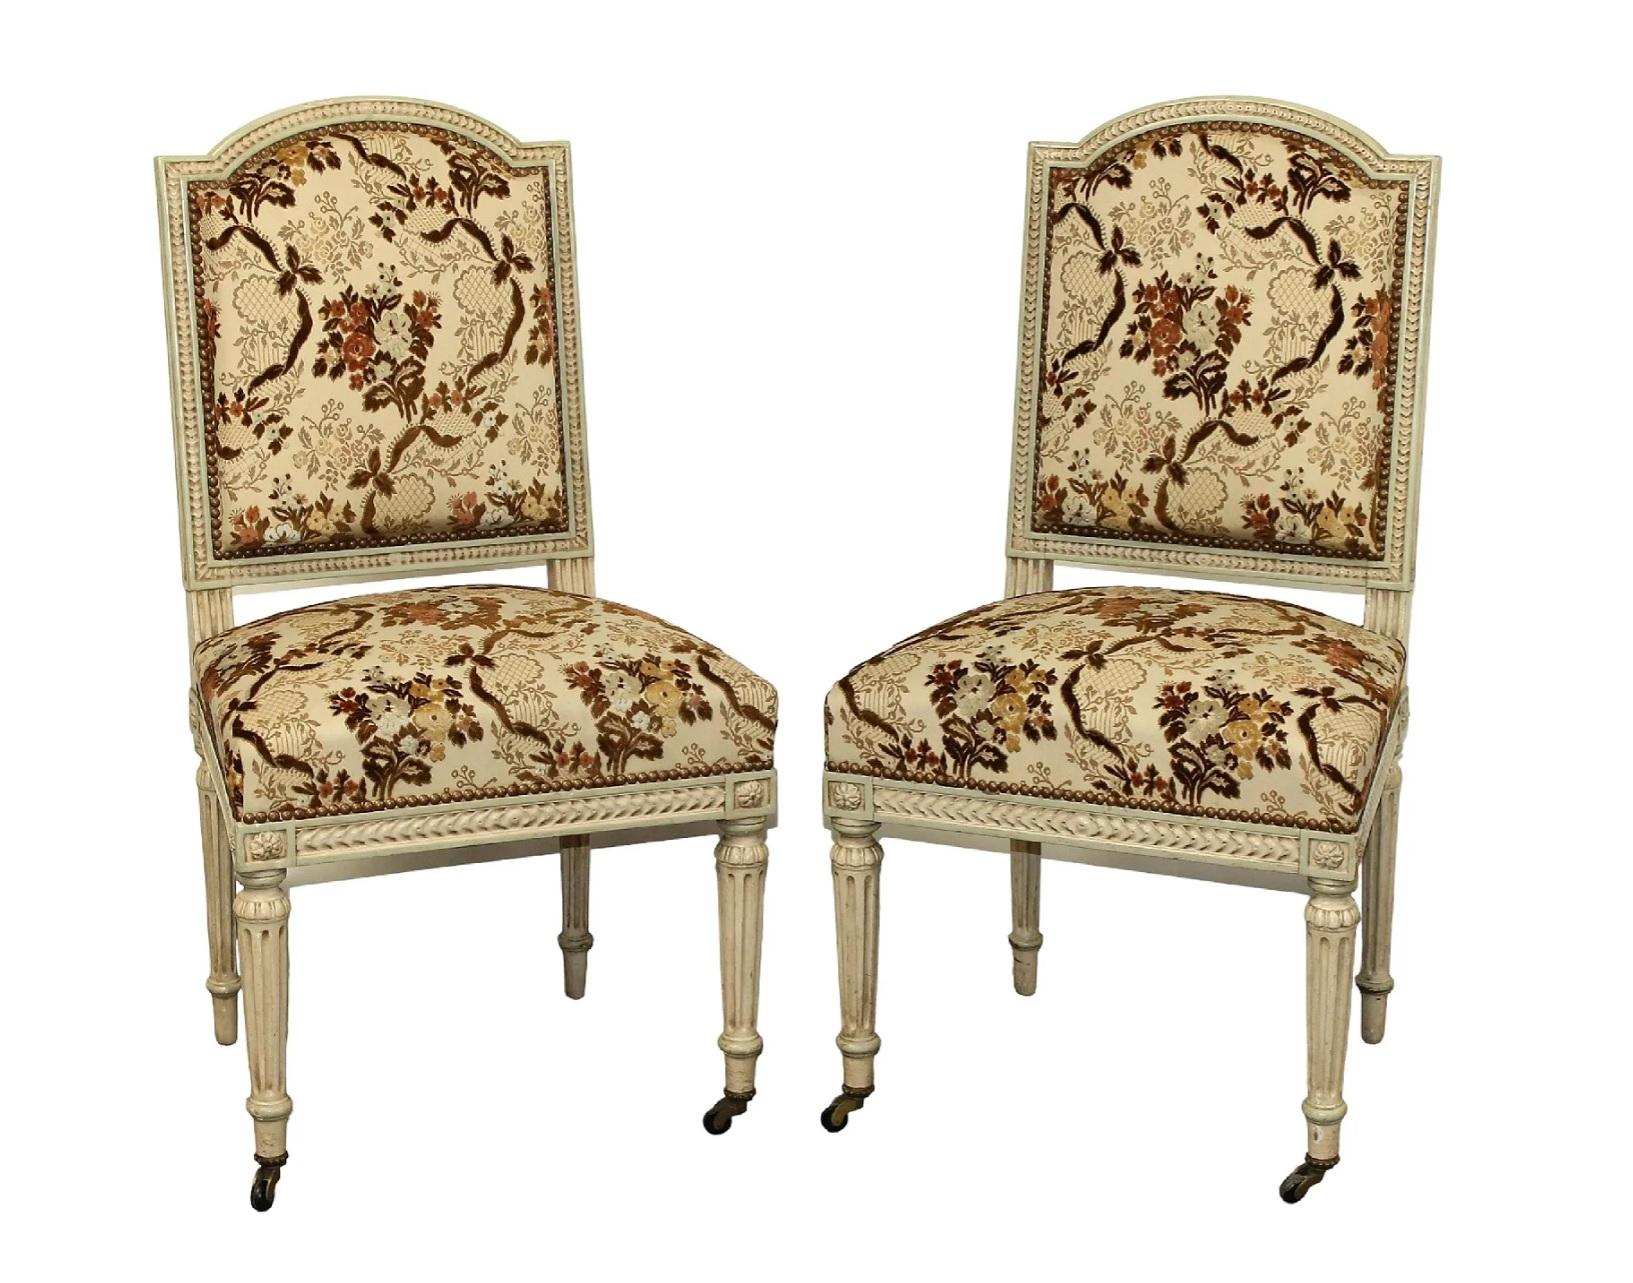 Pair of French Louis XVI style painted side chairs on fluted legs. Seats and backs are upholstered in a brown/tan/cream floral fabric with cut velvet details, in very nice condition. Brass nail heads border the upholstery; casters on the front legs.